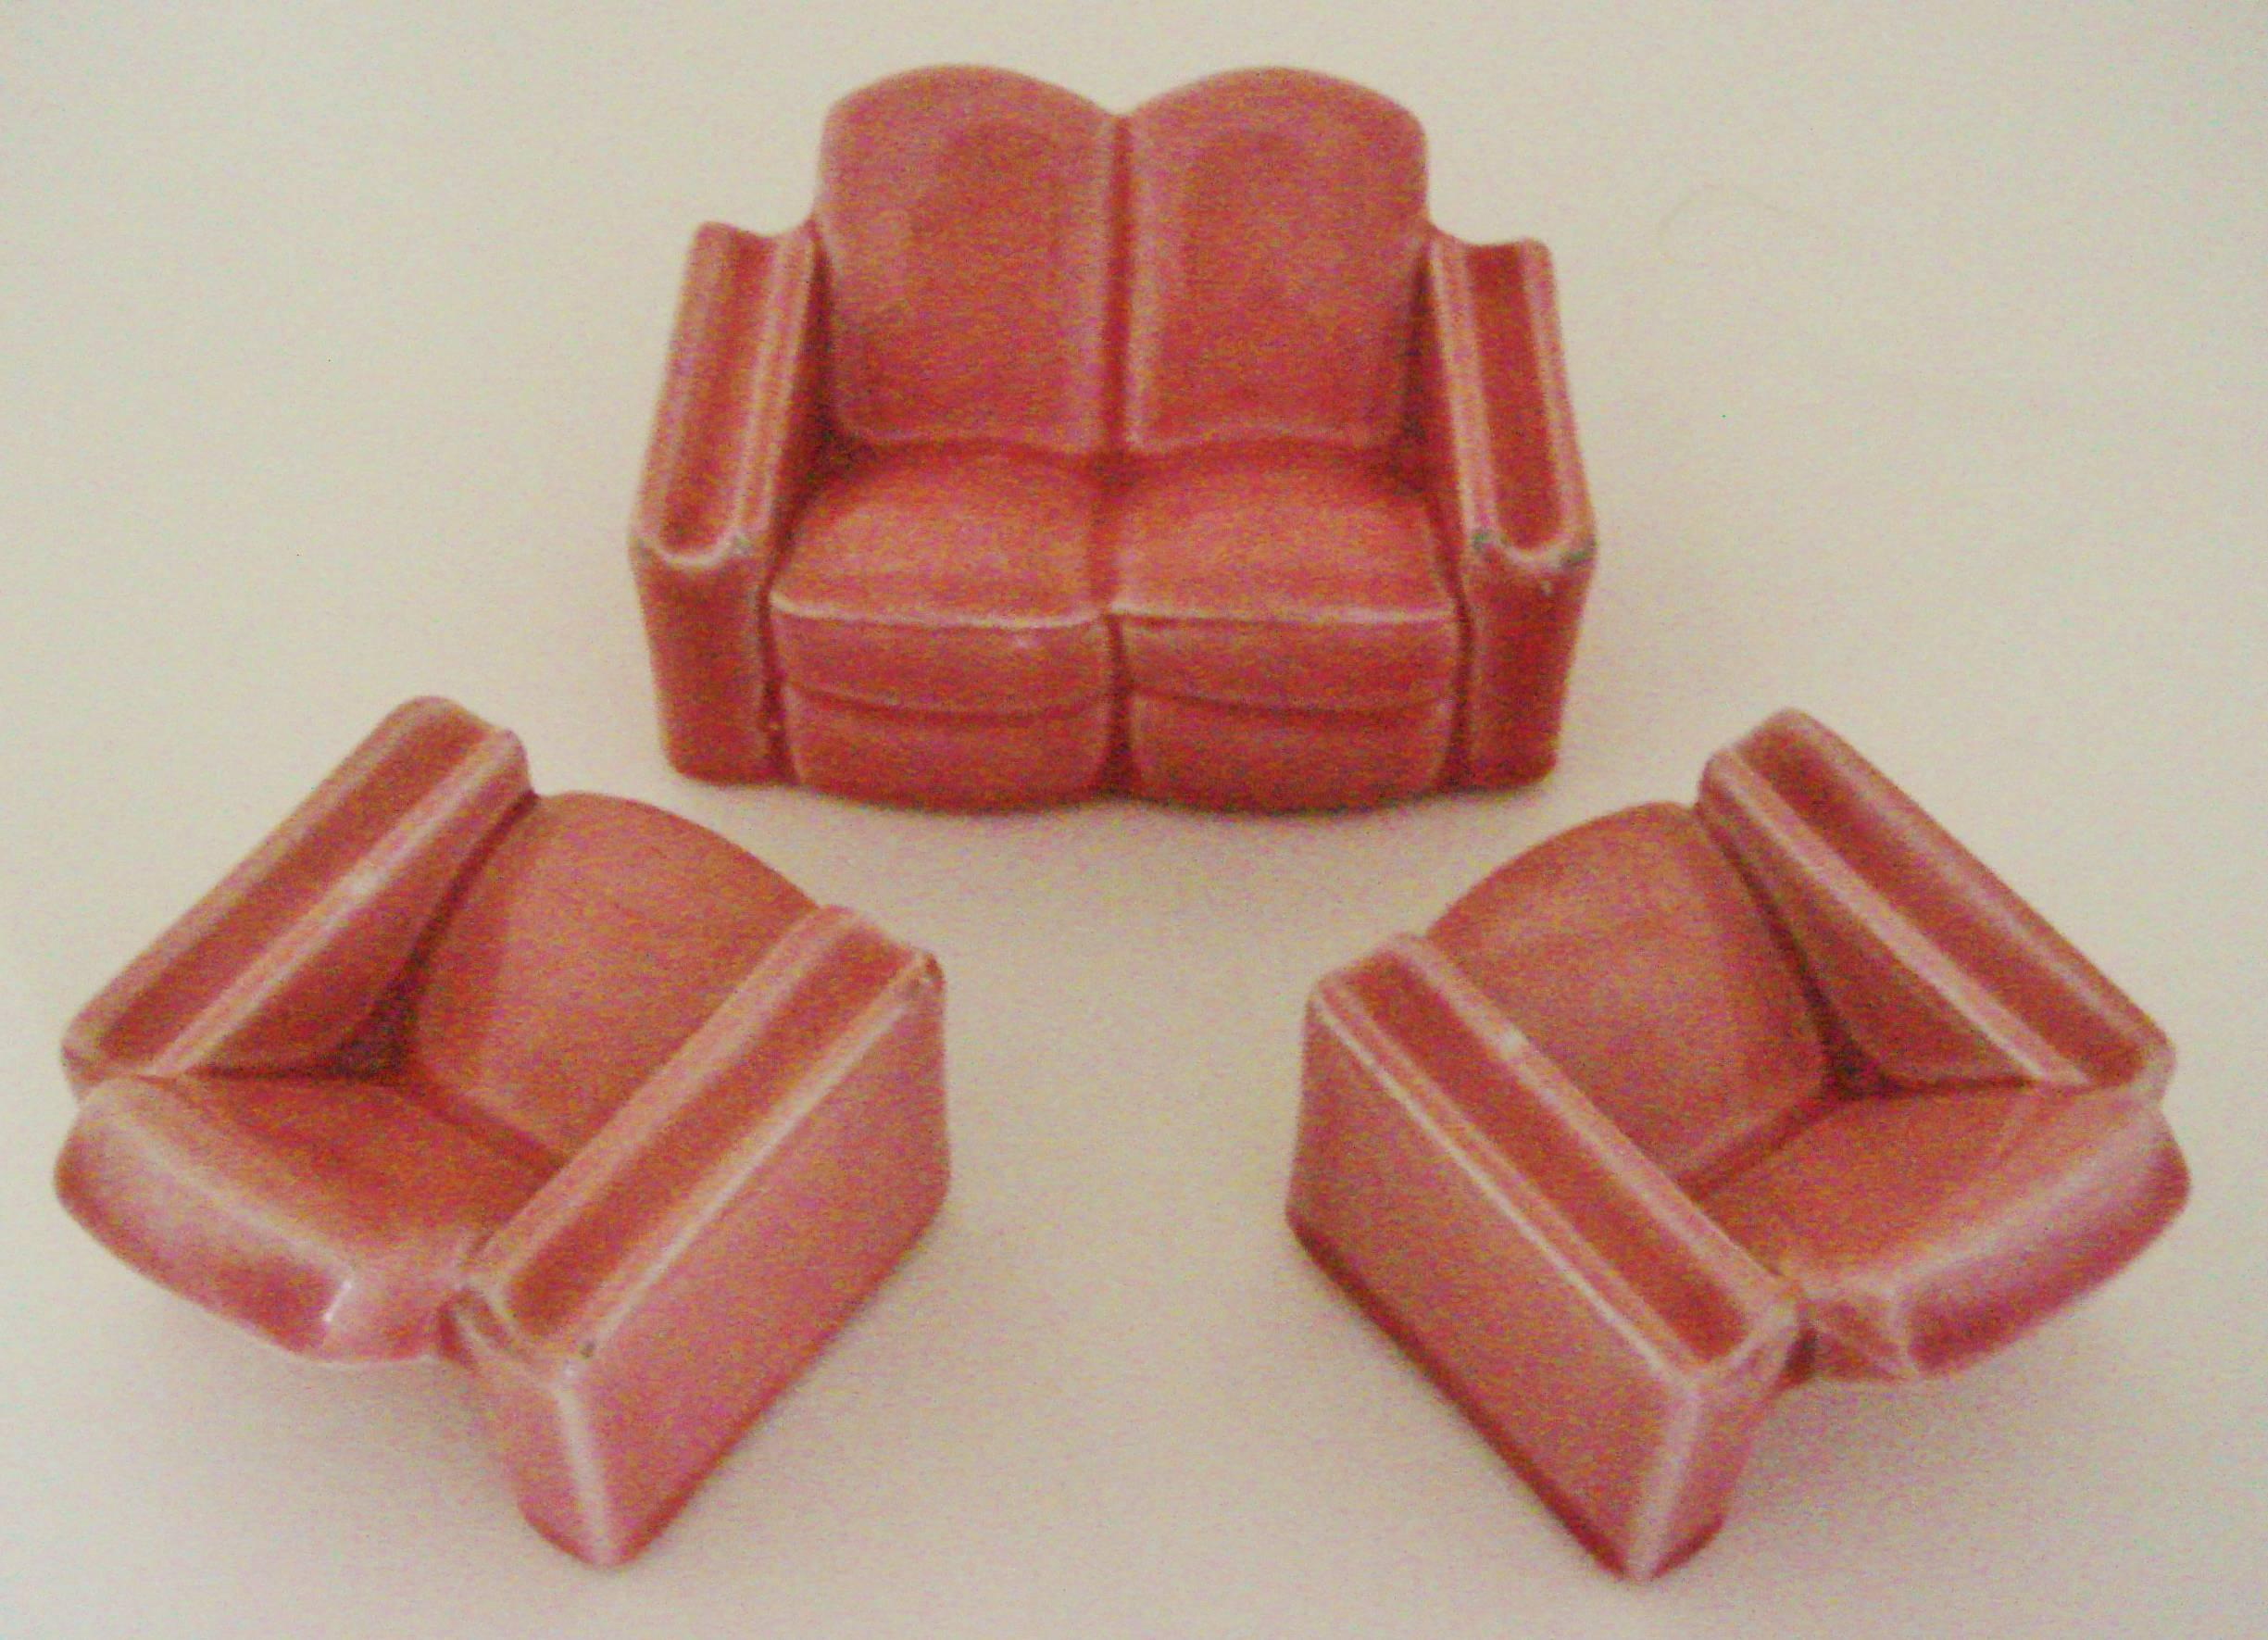 This charming three-piece suite of English Art Deco rose-pink glazed ceramic pieces is comprised of two armchairs (2.75 in deep X 2.25 in high X 2.5 in wide) and a loveseat (2.75 in deep X 2.25 in X 4.0 in wide). They look as though they belong in